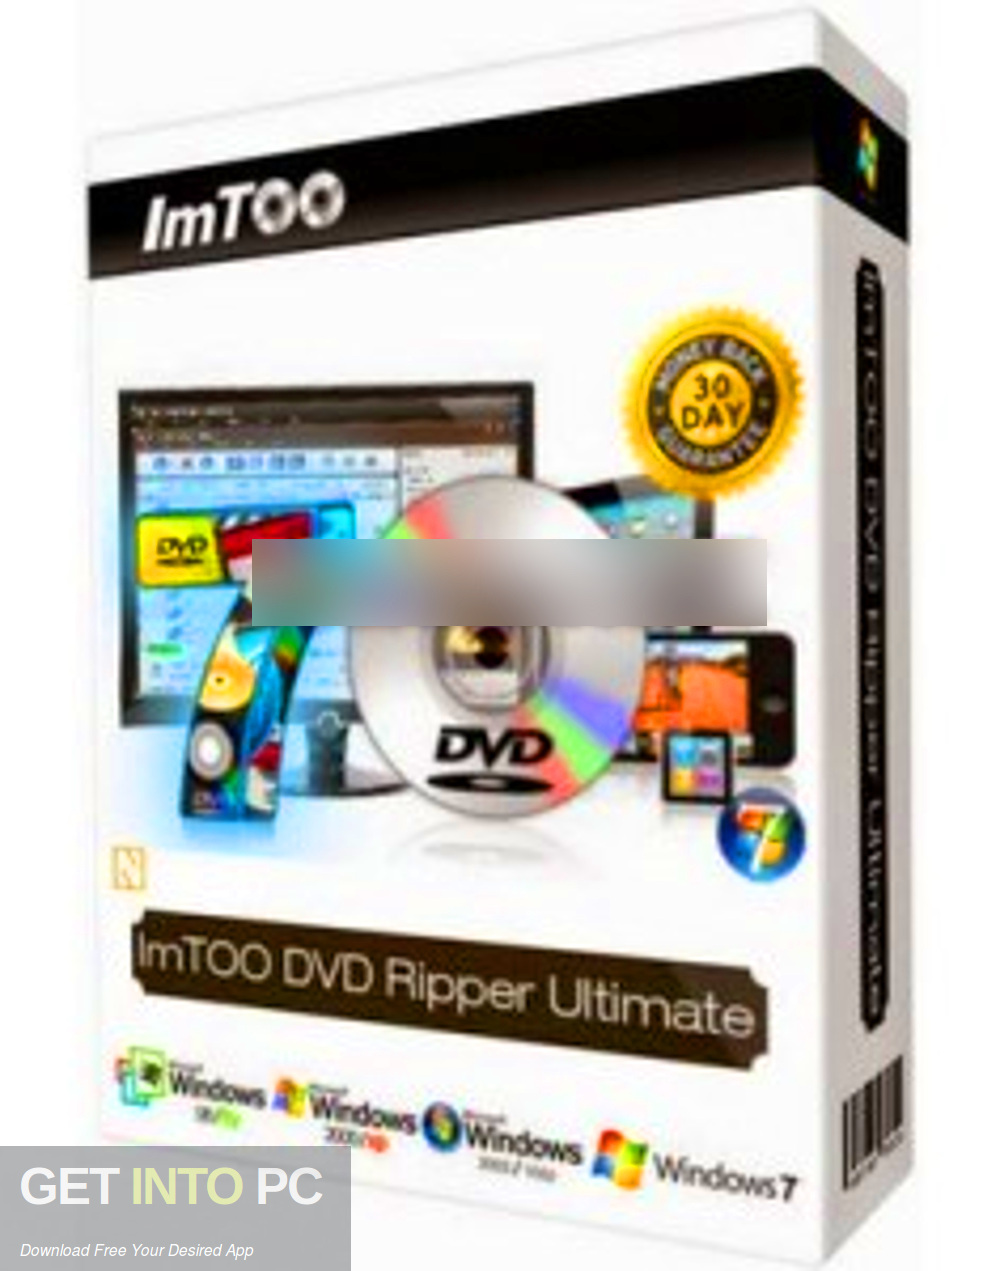 ImTOO DVD Ripper Ultimate Free Download GetintoPC.com